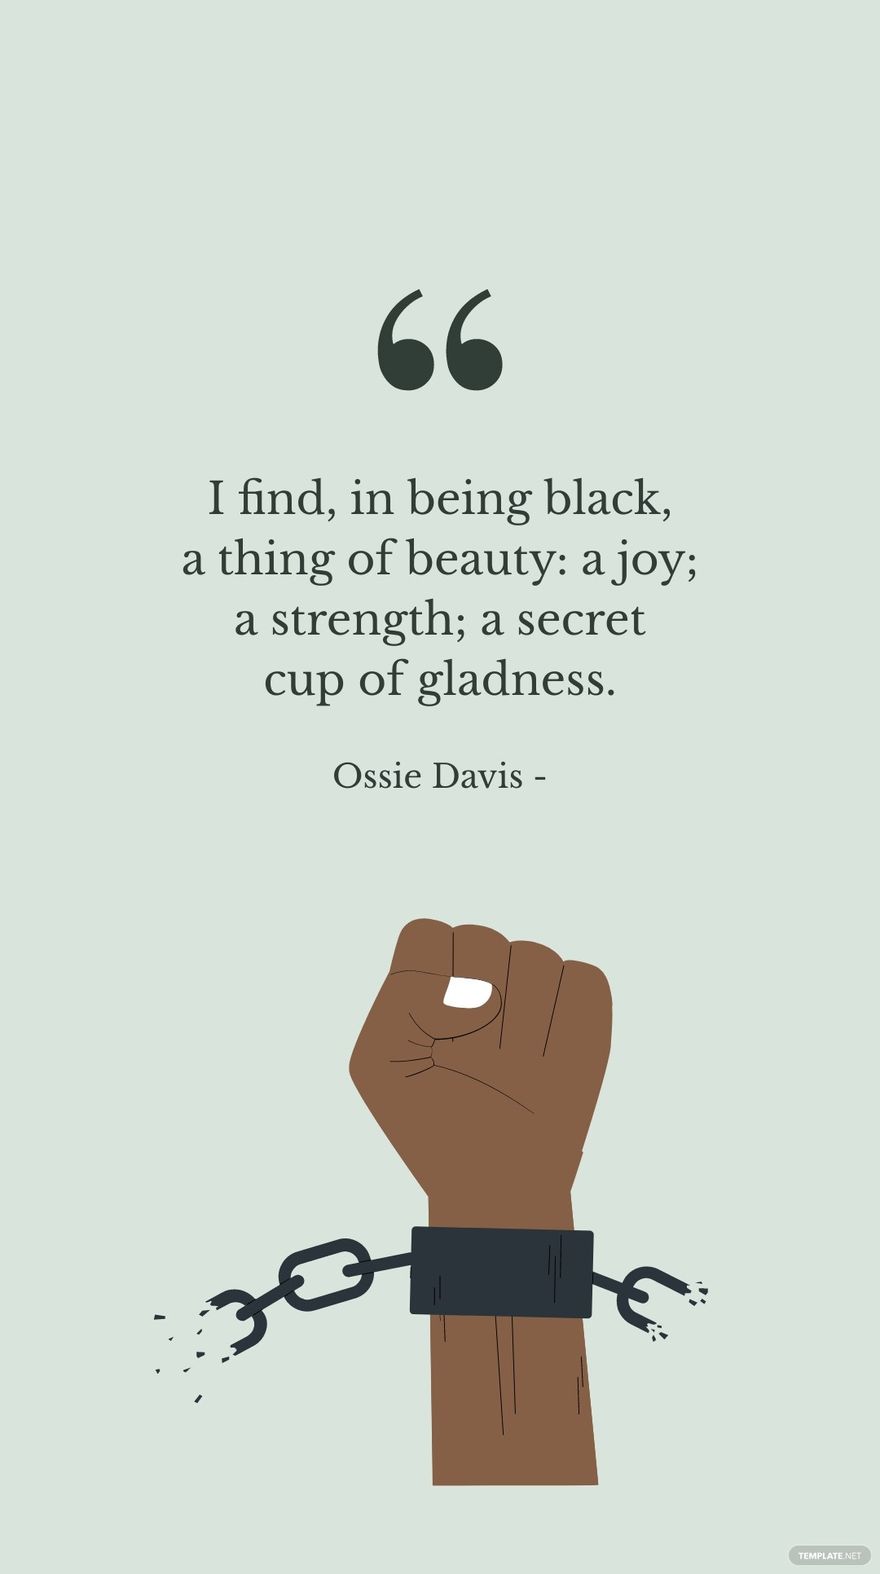 Ossie Davis - I find, in being black, a thing of beauty: a joy; a strength; a secret cup of gladness.